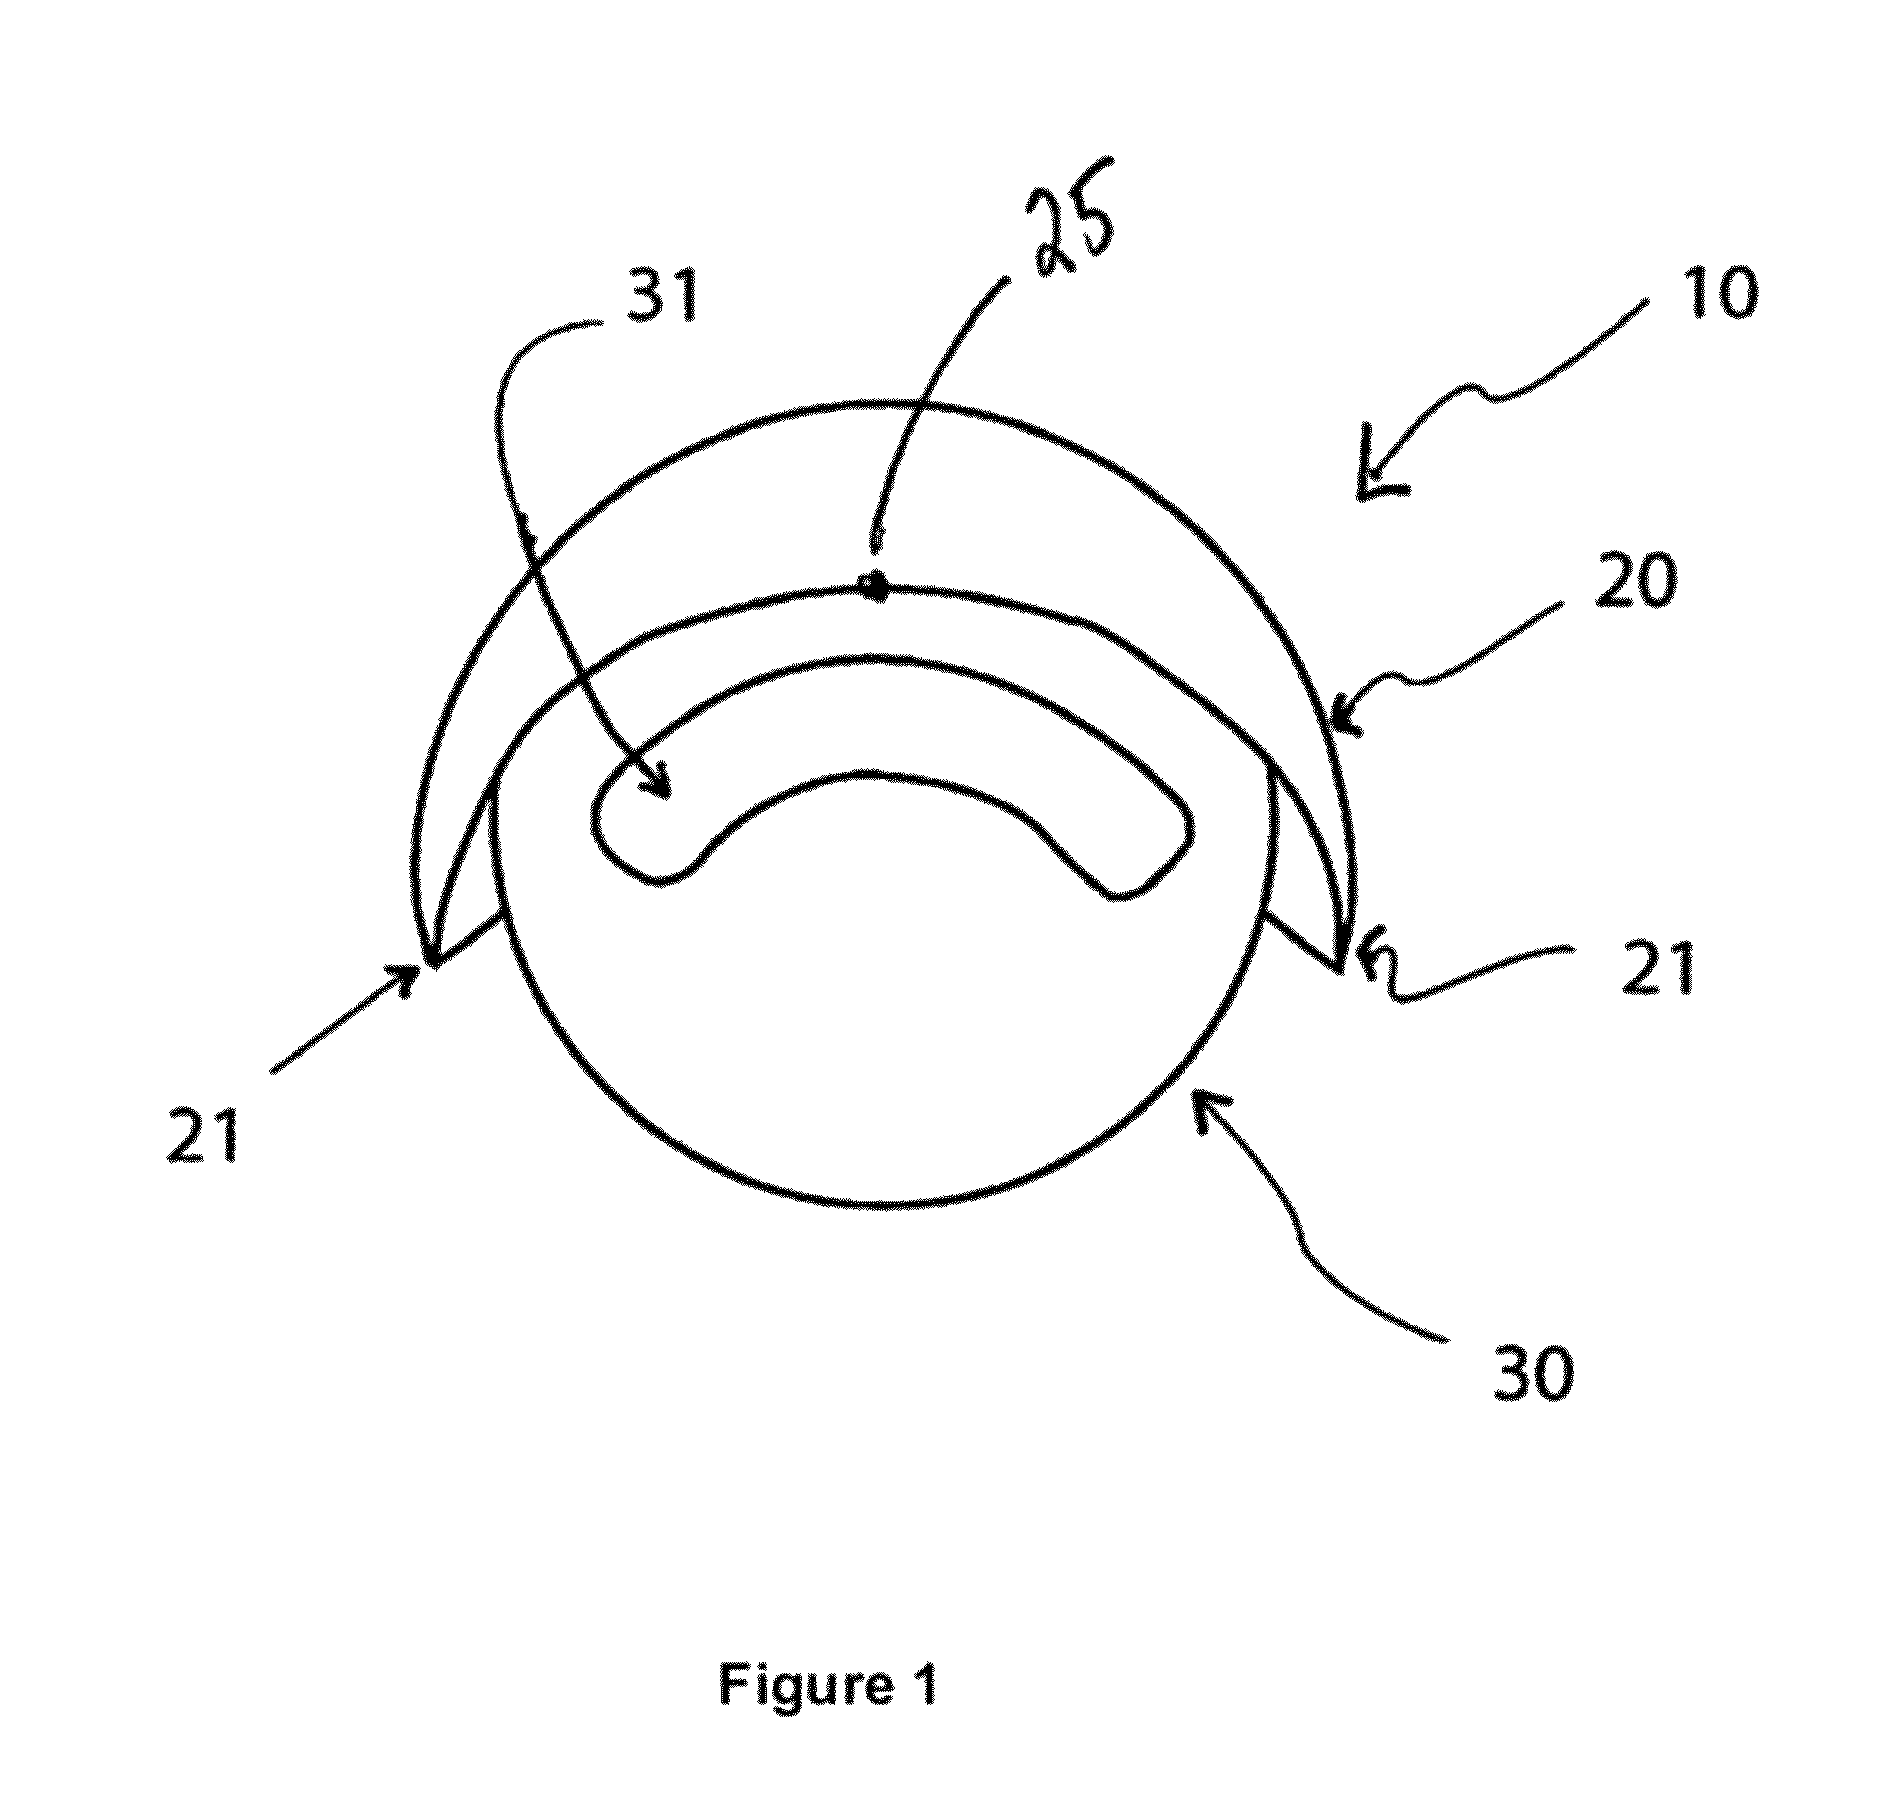 Facial muscle exercise ball-like device and method